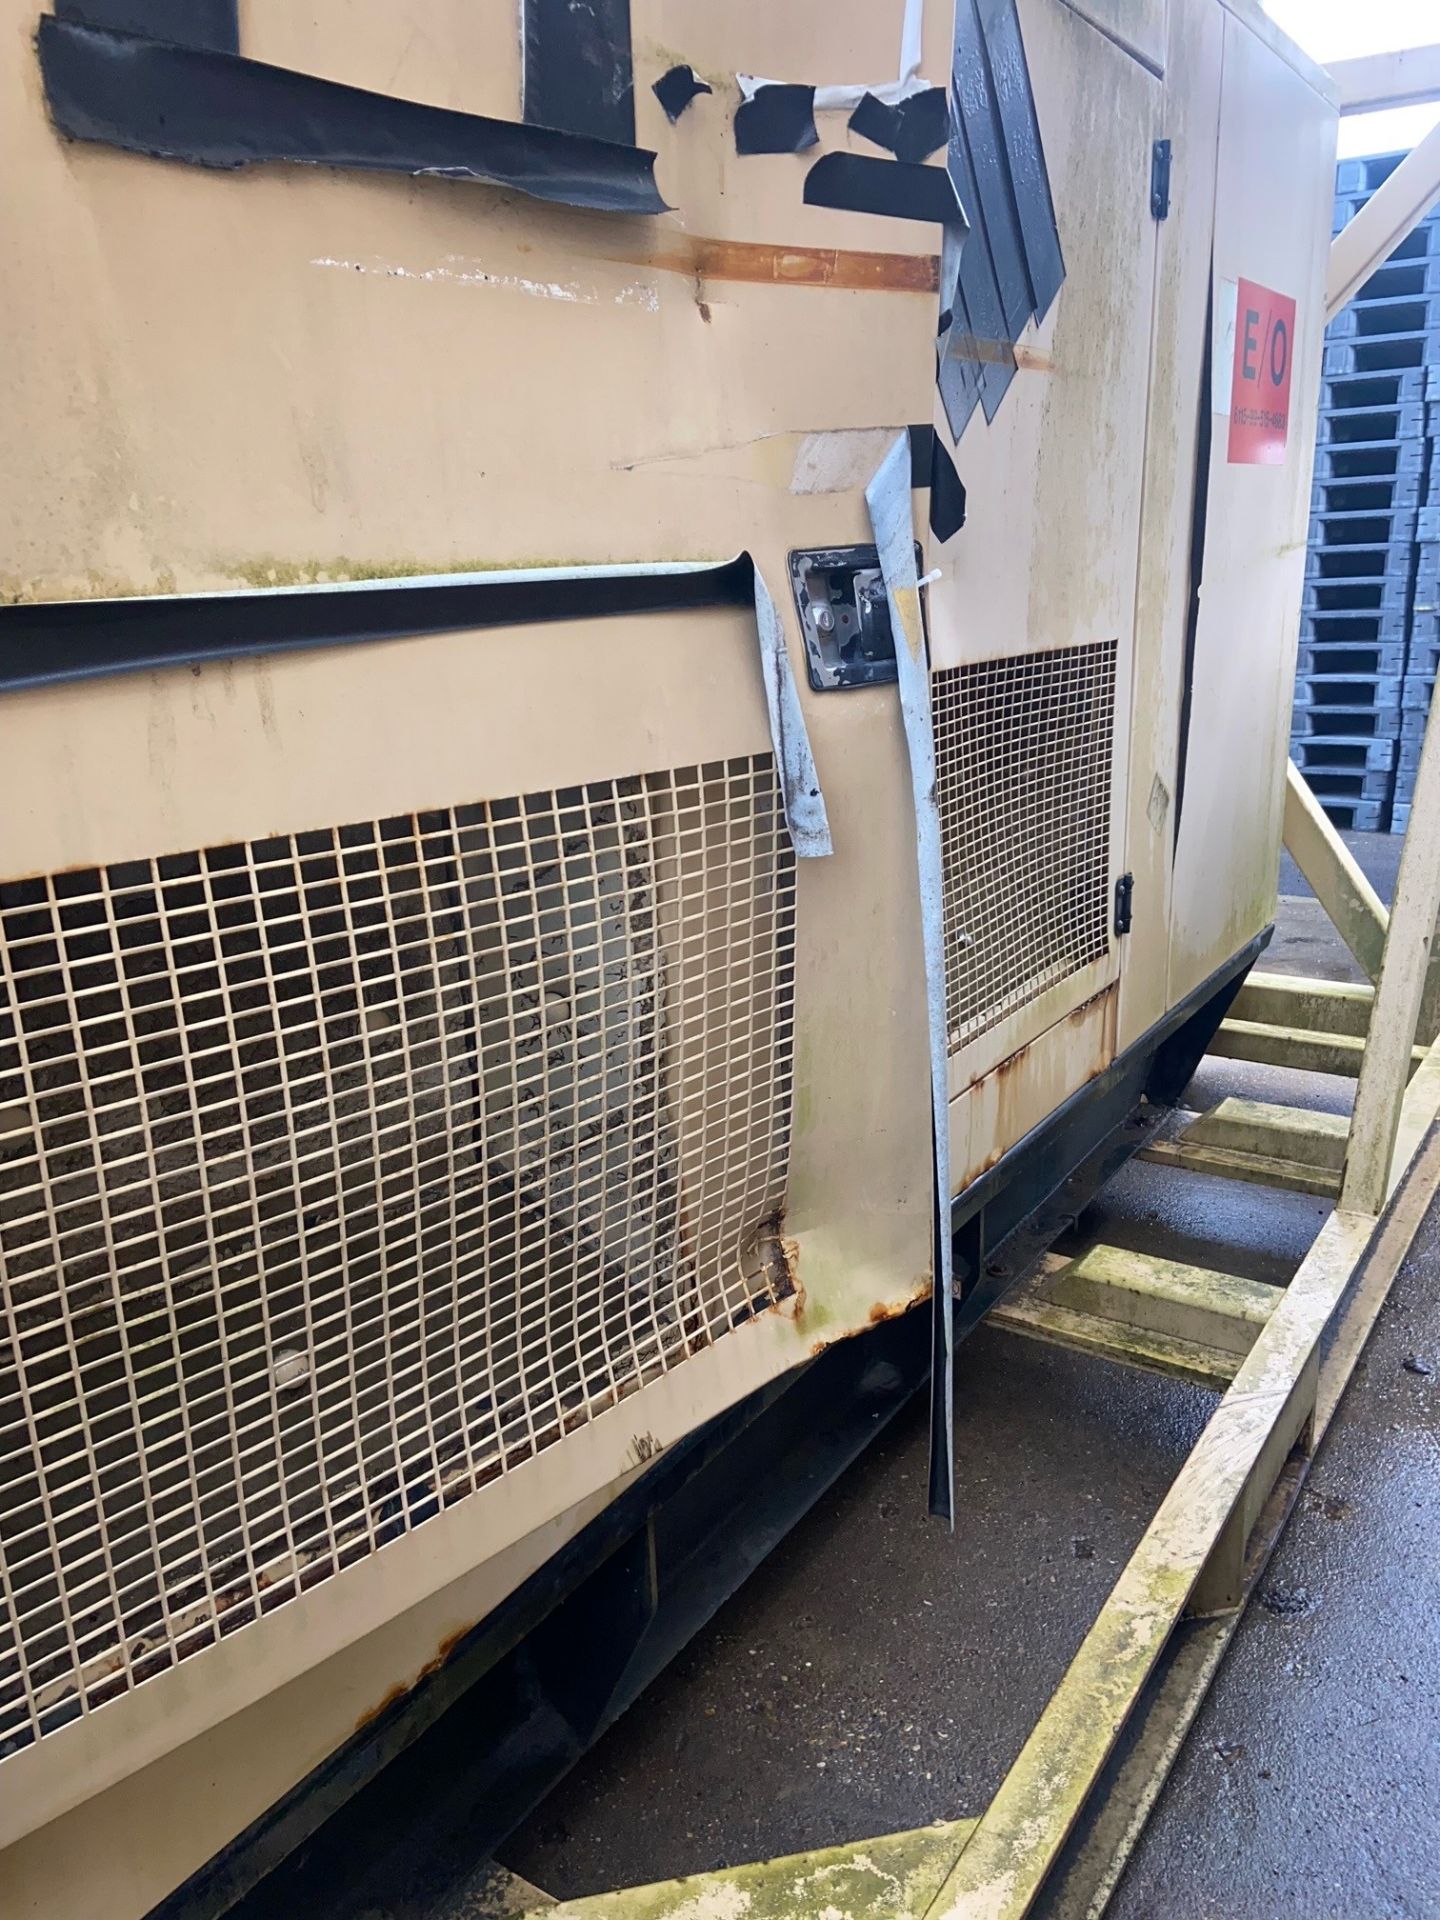 Caterpillar 320KVA 256kW Generator 445Amps per phase at 415v - 50Hz - 1500RPM - see description - Image 15 of 17